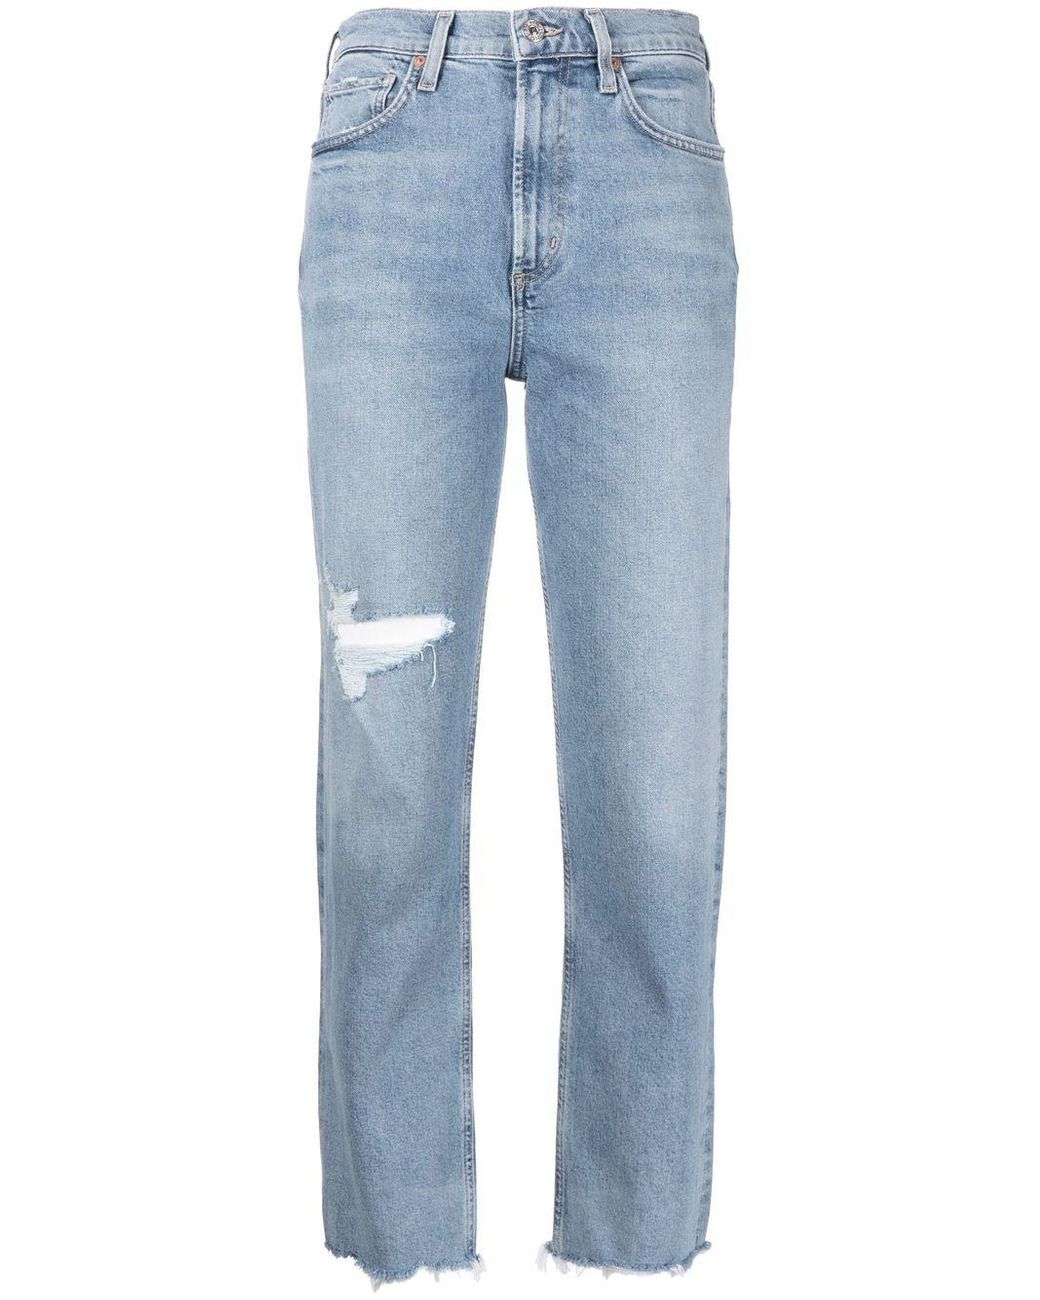 Citizens of Humanity Denim Daphne Ripped Cropped Jeans in Blue | Lyst